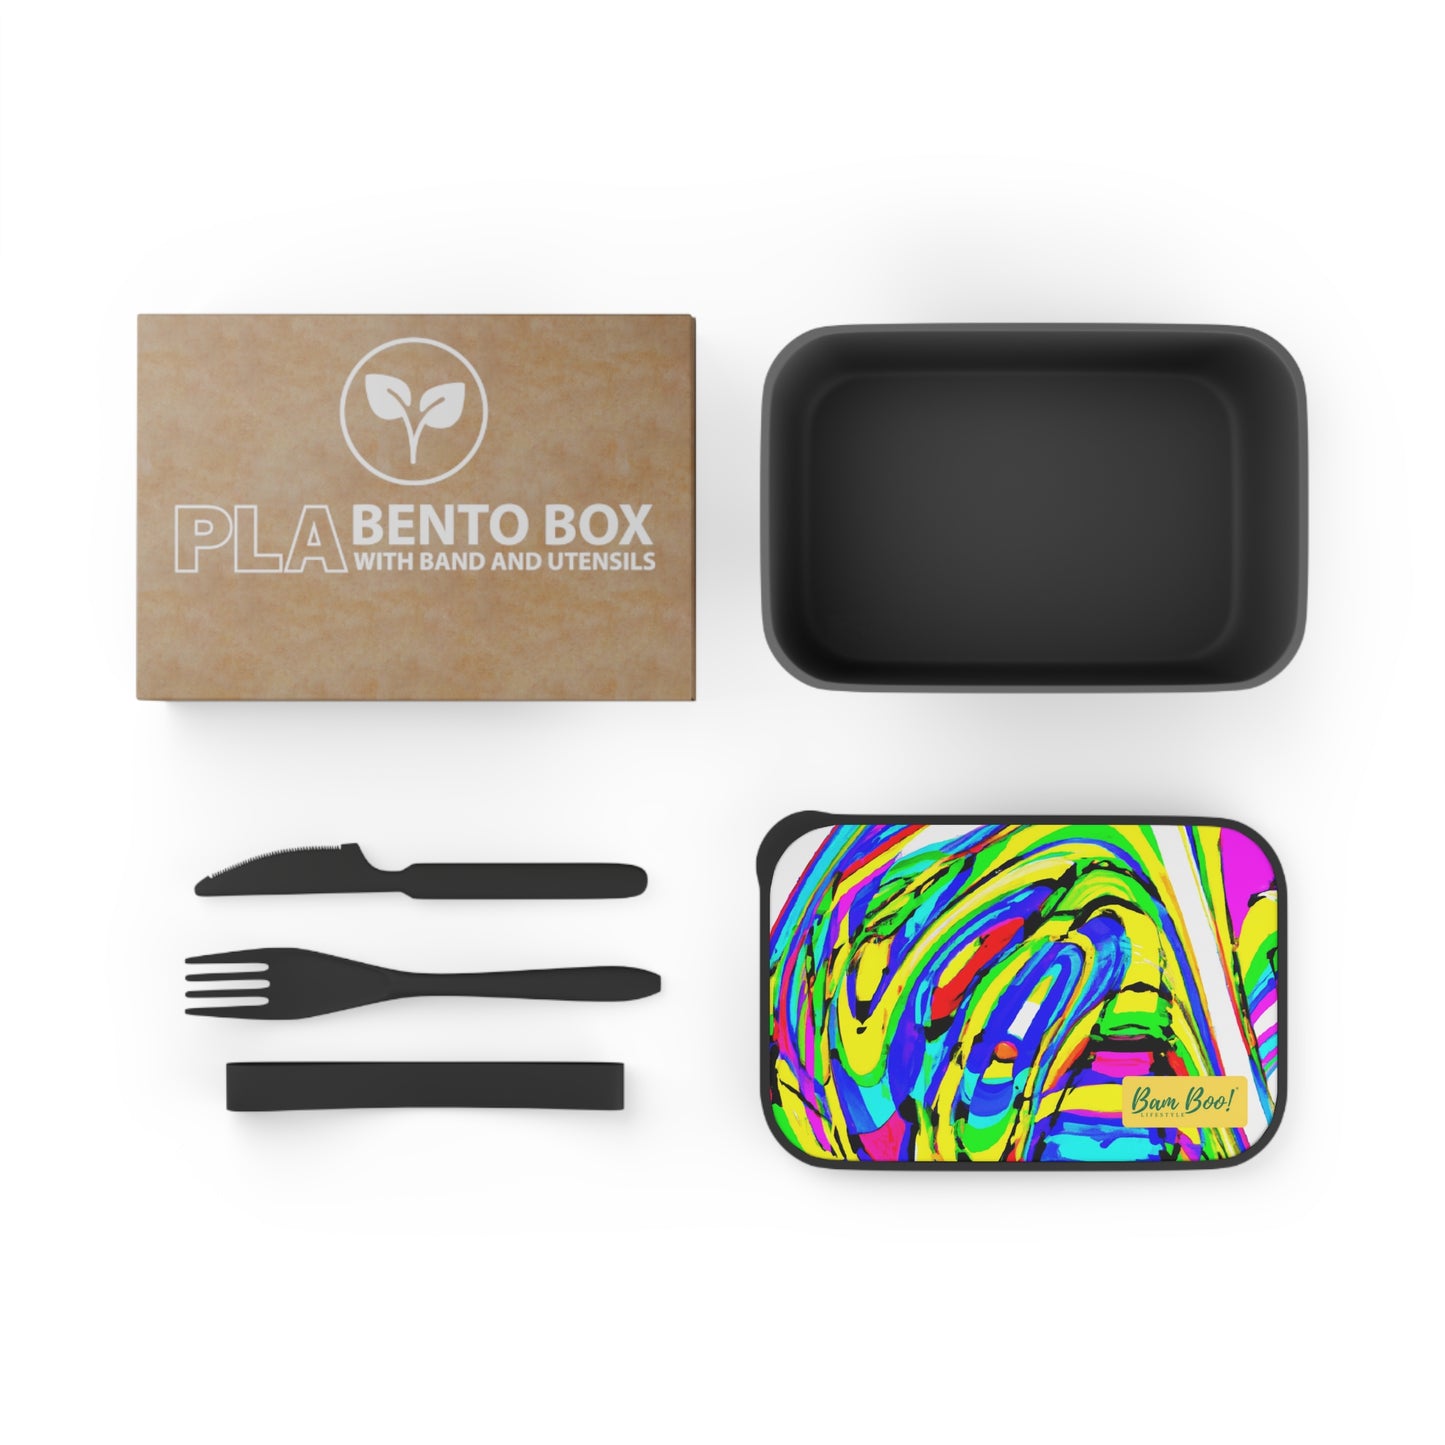 "Kinetic Energy in Color" - Bam Boo! Lifestyle Eco-friendly PLA Bento Box with Band and Utensils